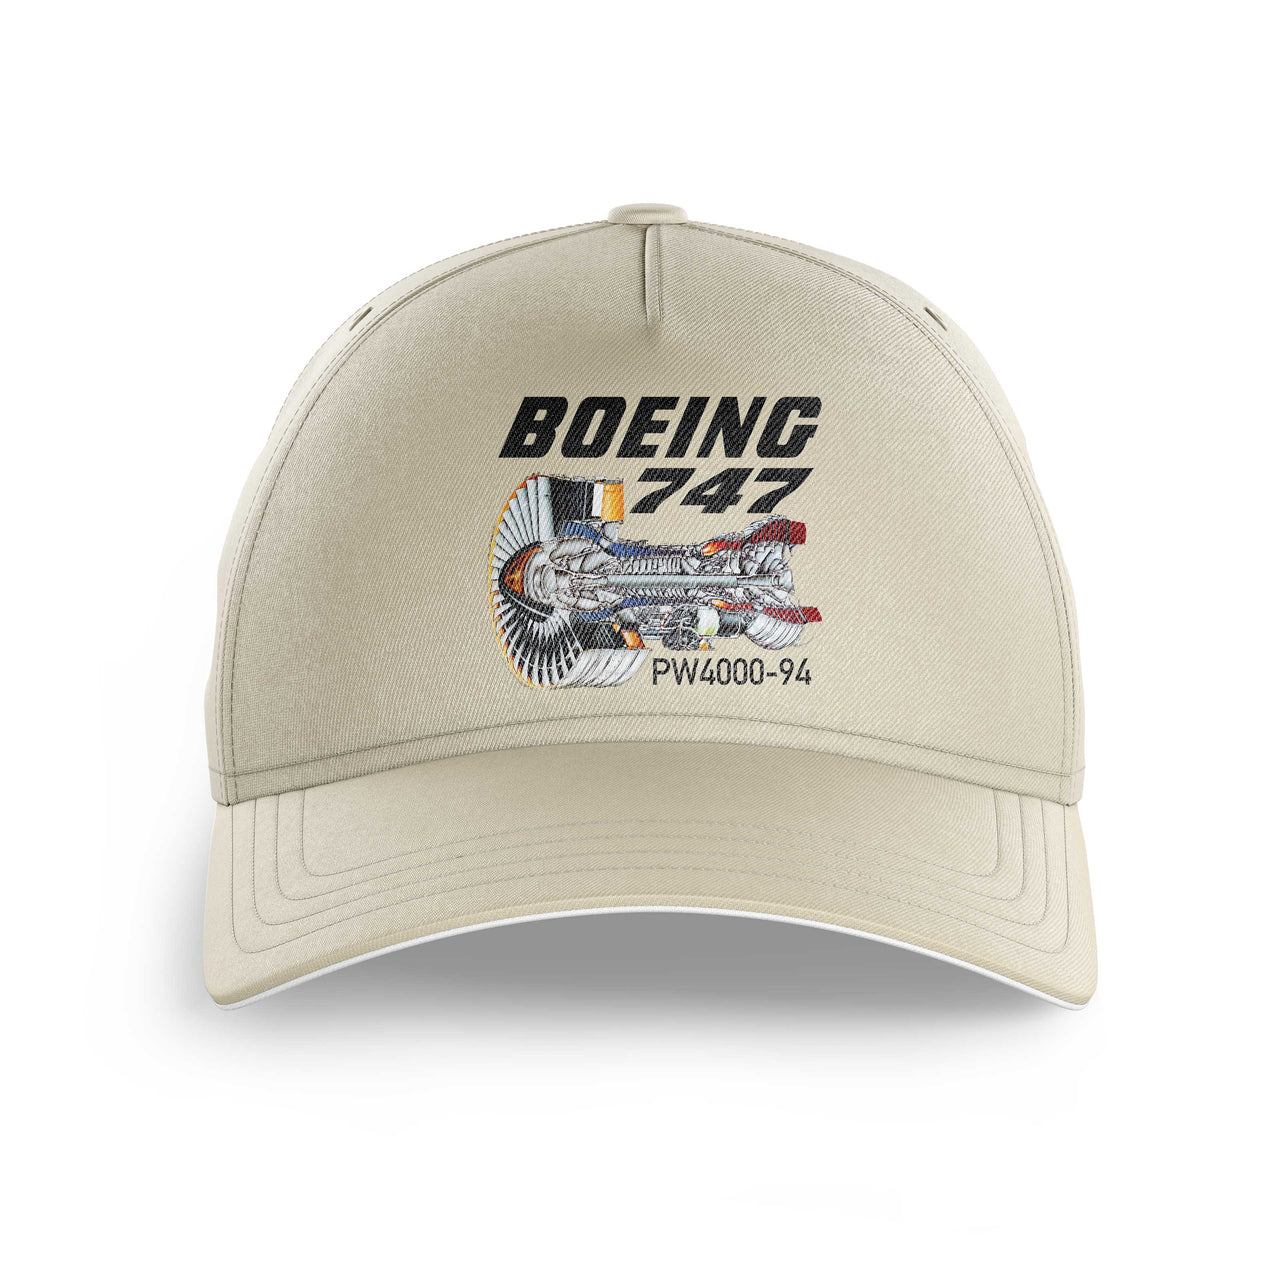 Boeing 747 & PW4000-94 Engine Printed Hats